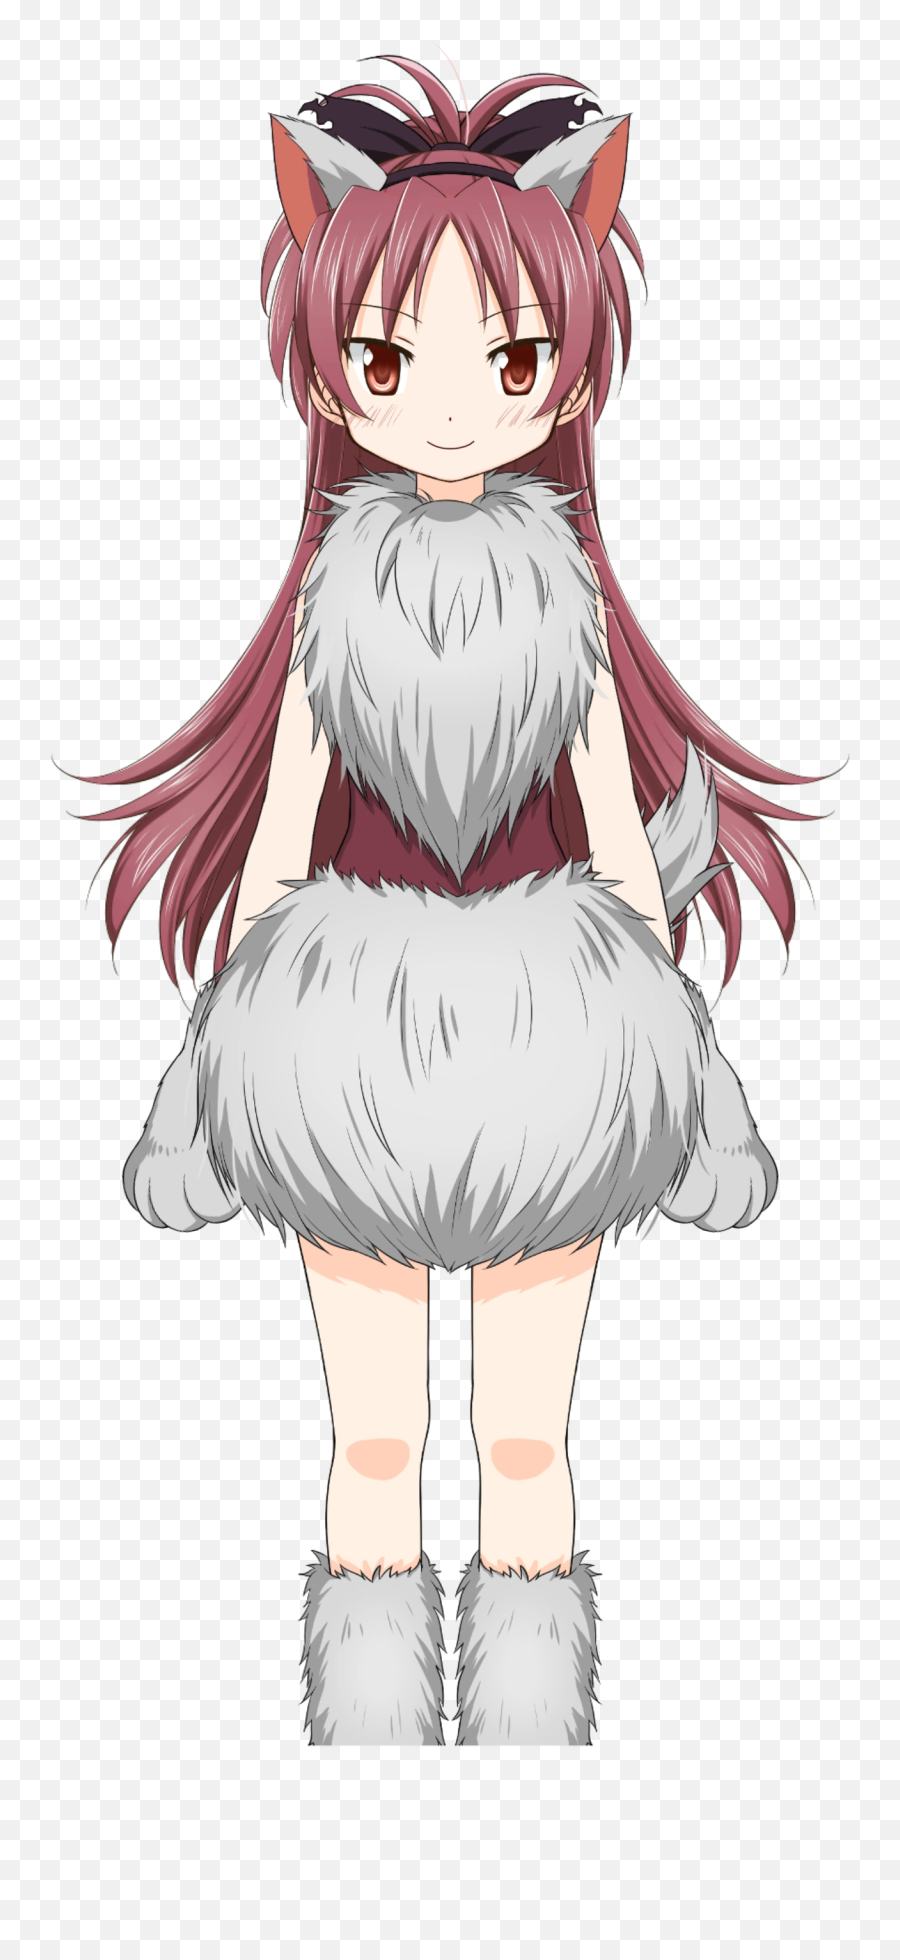 Maginet - Reddit Post And Comment Search Socialgrep Emoji,Kyubey Emoticon Text